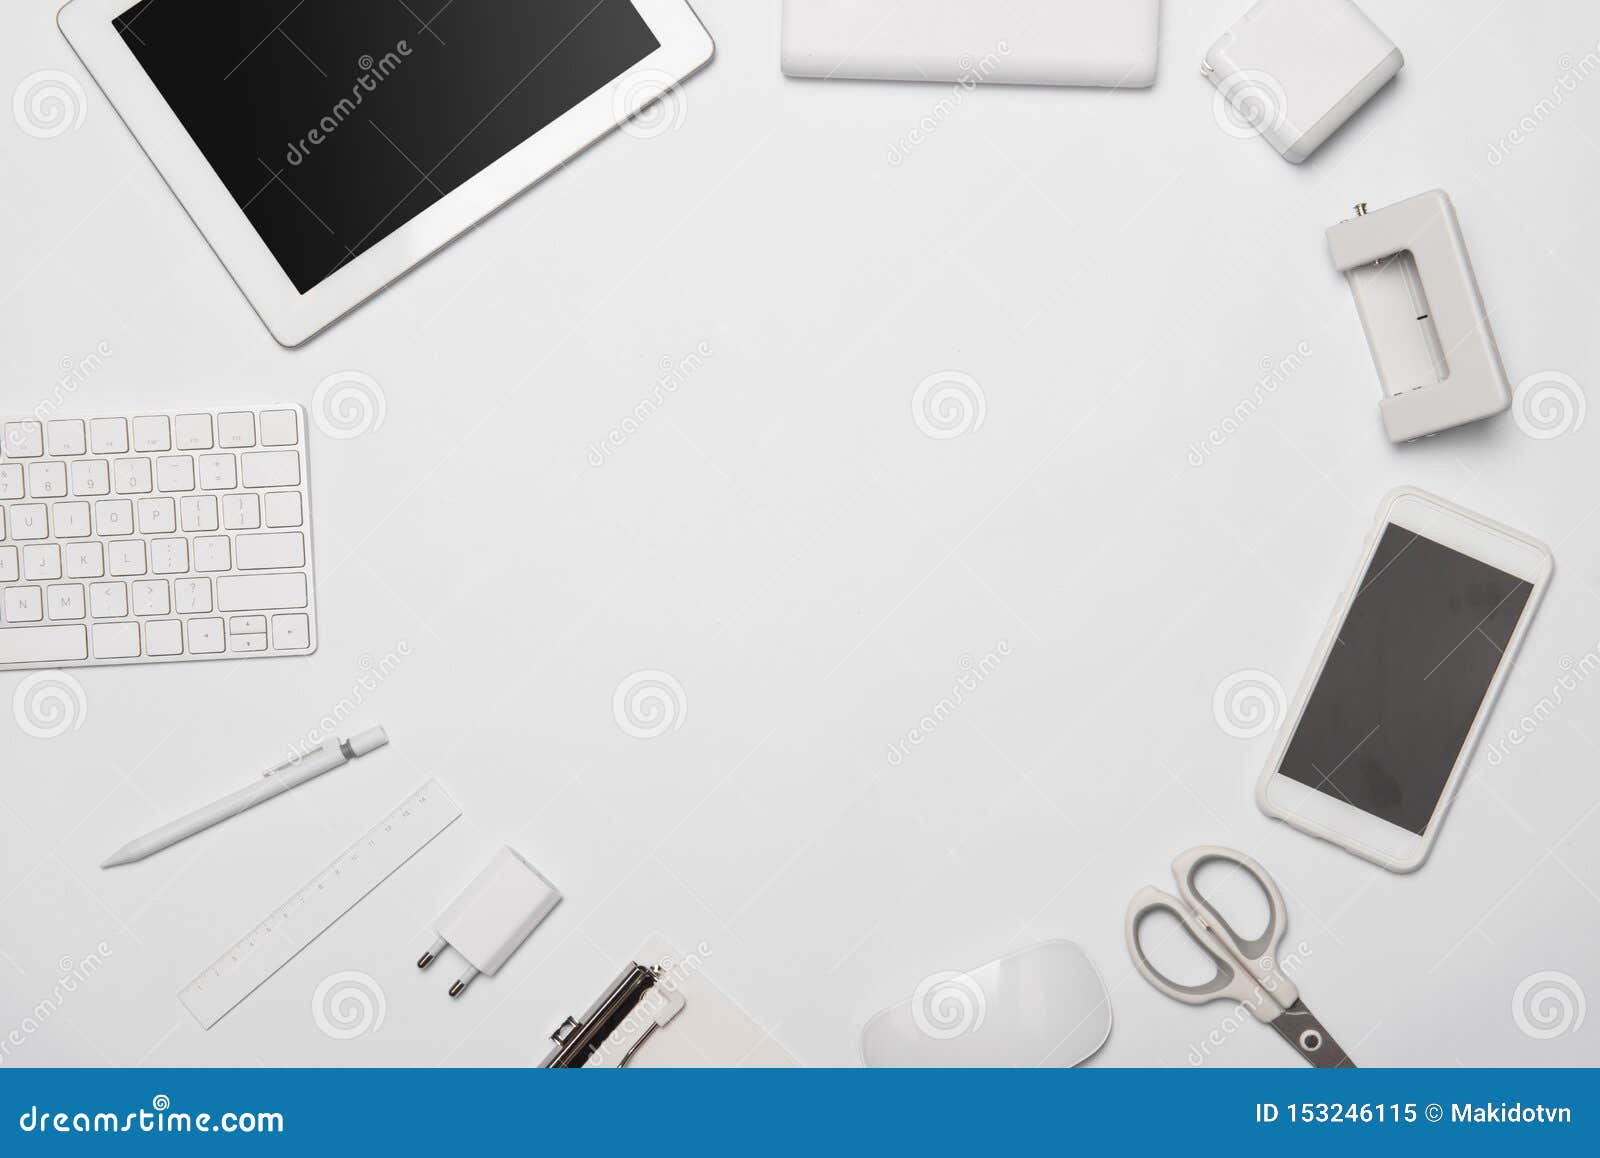 Mix Of Office Supplies And Gadgets On White Background Stock Photo, Picture  and Royalty Free Image. Image 127239654.